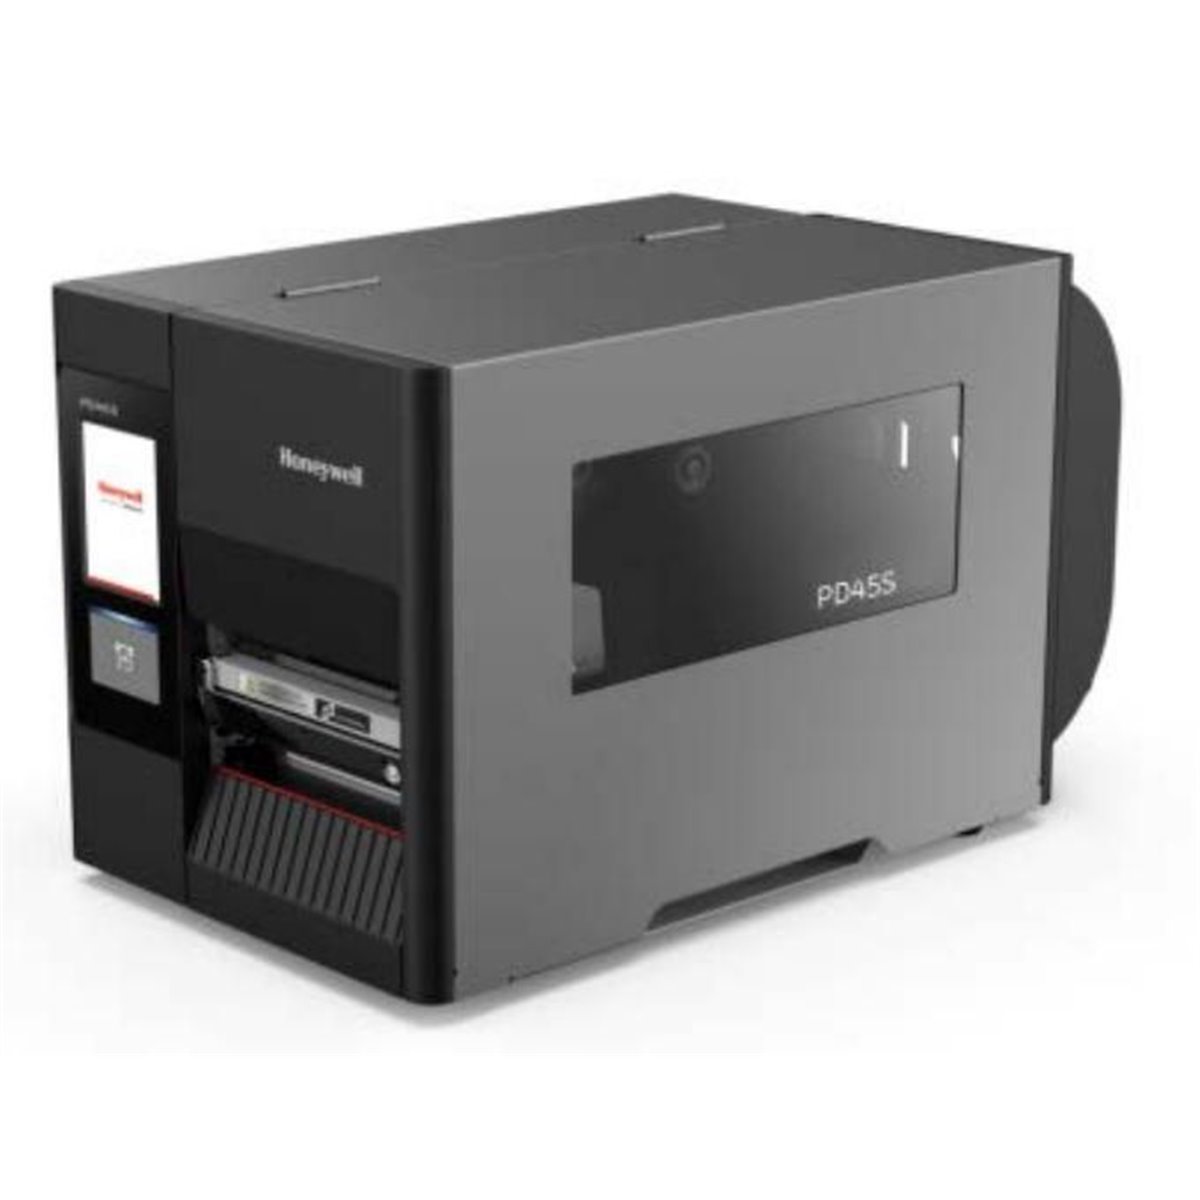 HONEYWELL PD45S0F Full touch screen Direct Thermal and Transfer printer Ethernet no - Label Printer - 203 dpi